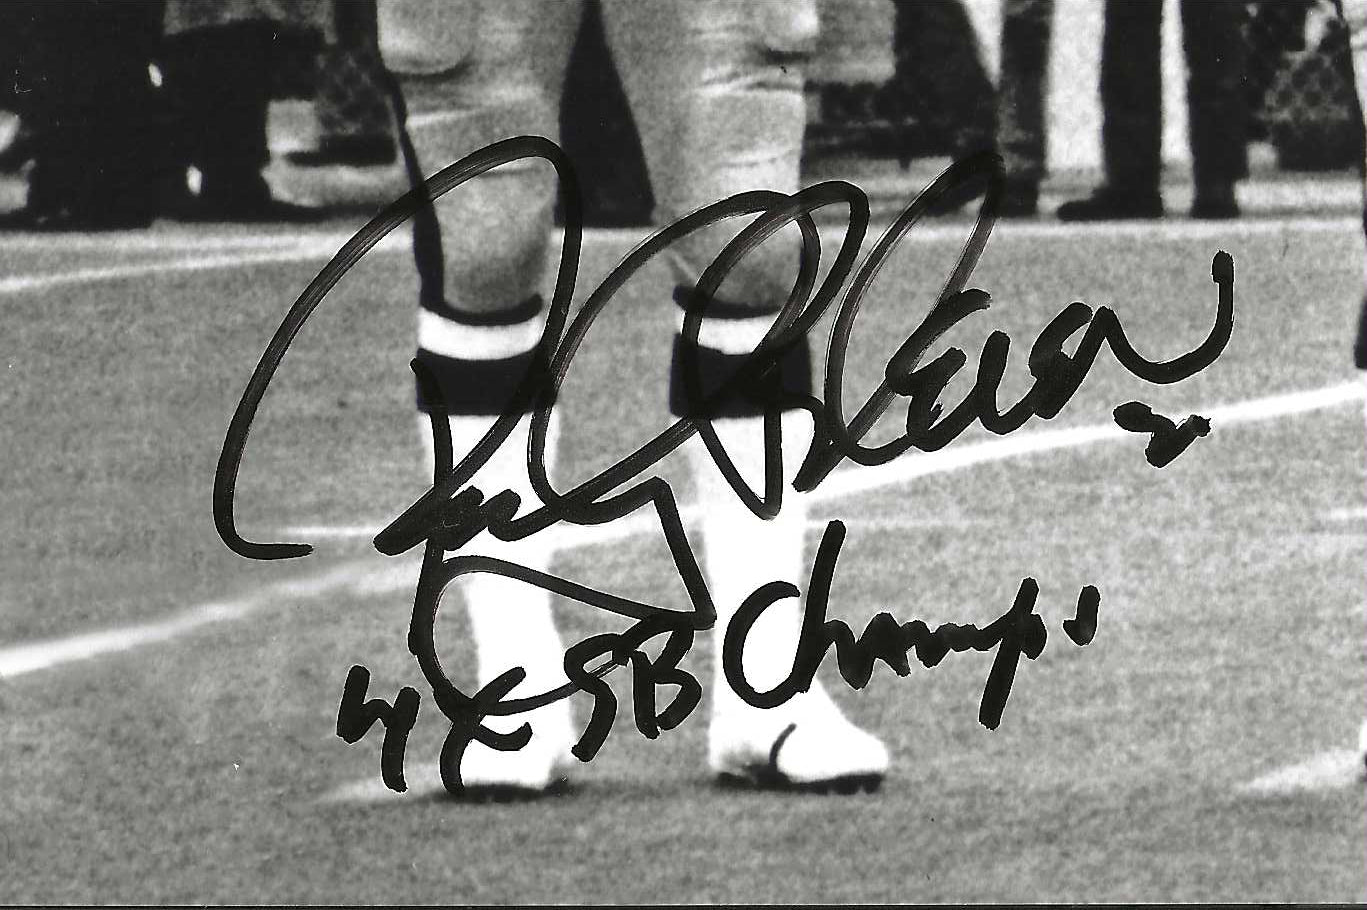 Pittsburgh Steelers Rocky Bleier During S. B. IX In 1975 Authentic Autograph With "4 Time S.B. Champs" Inscription 8x10 Photo, Picture